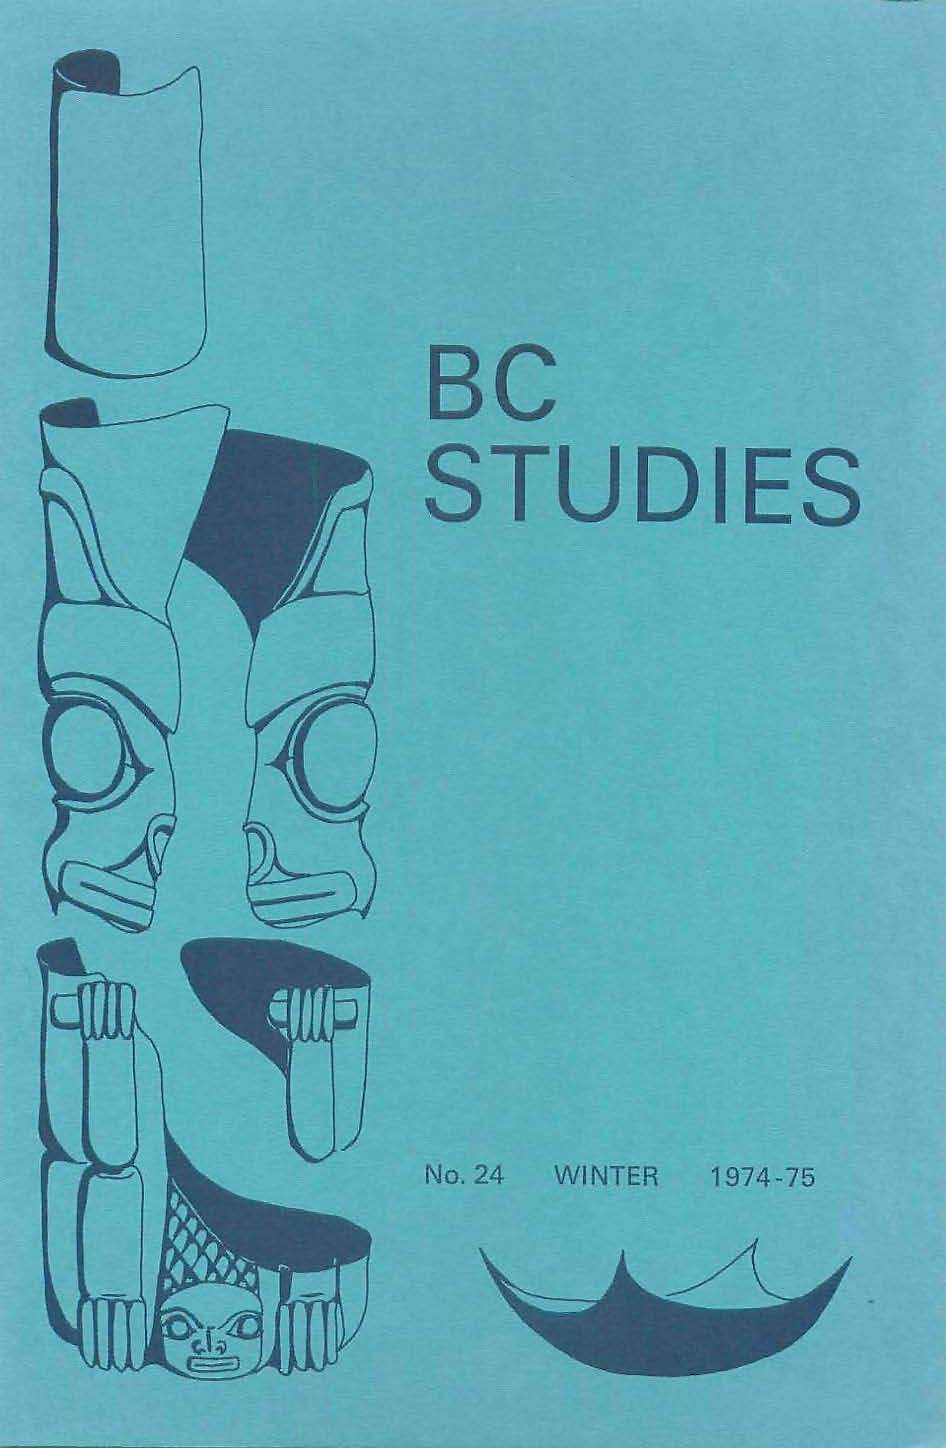 Product Image of: BC Studies no. 24 Winter 1974